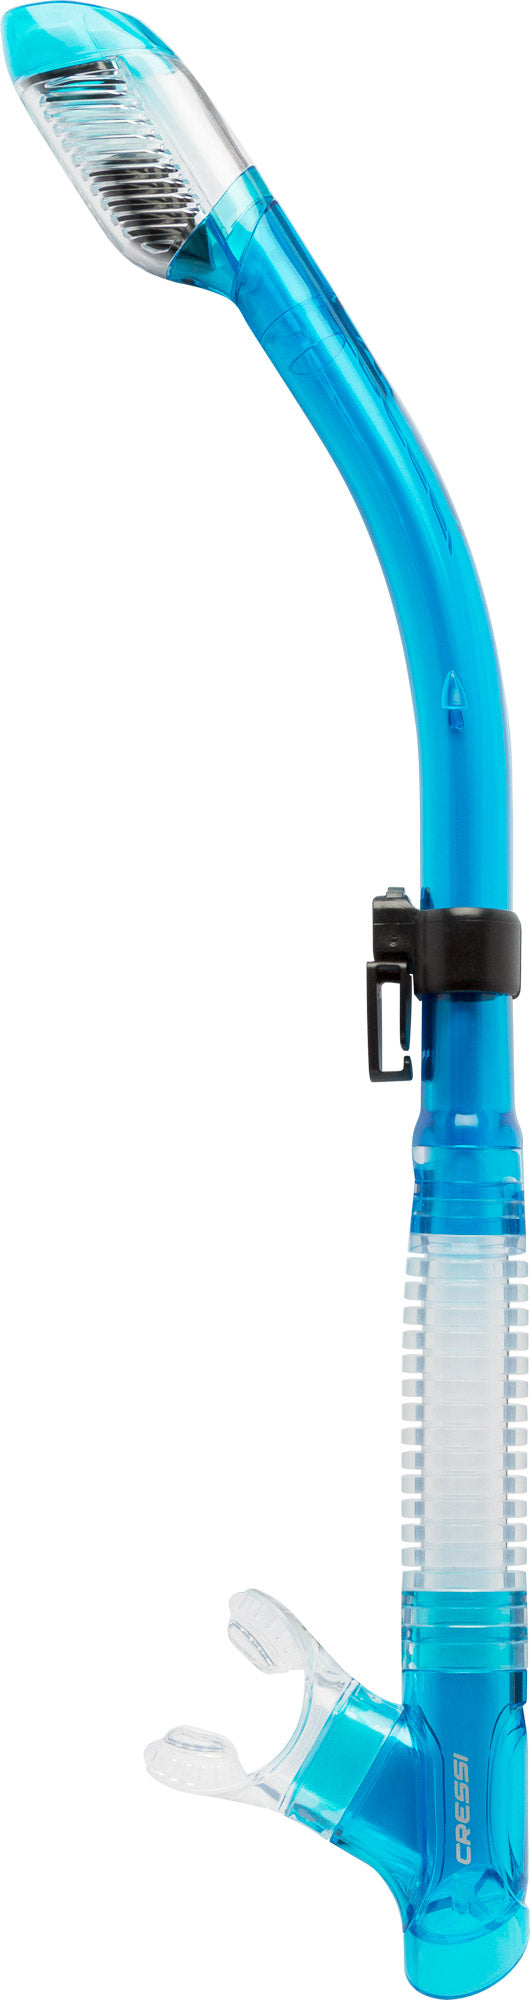 Cressi Adult Dry-Top Snorkel, Snorkeling Without Worry About Water - Tao Dry: Designed in Italy